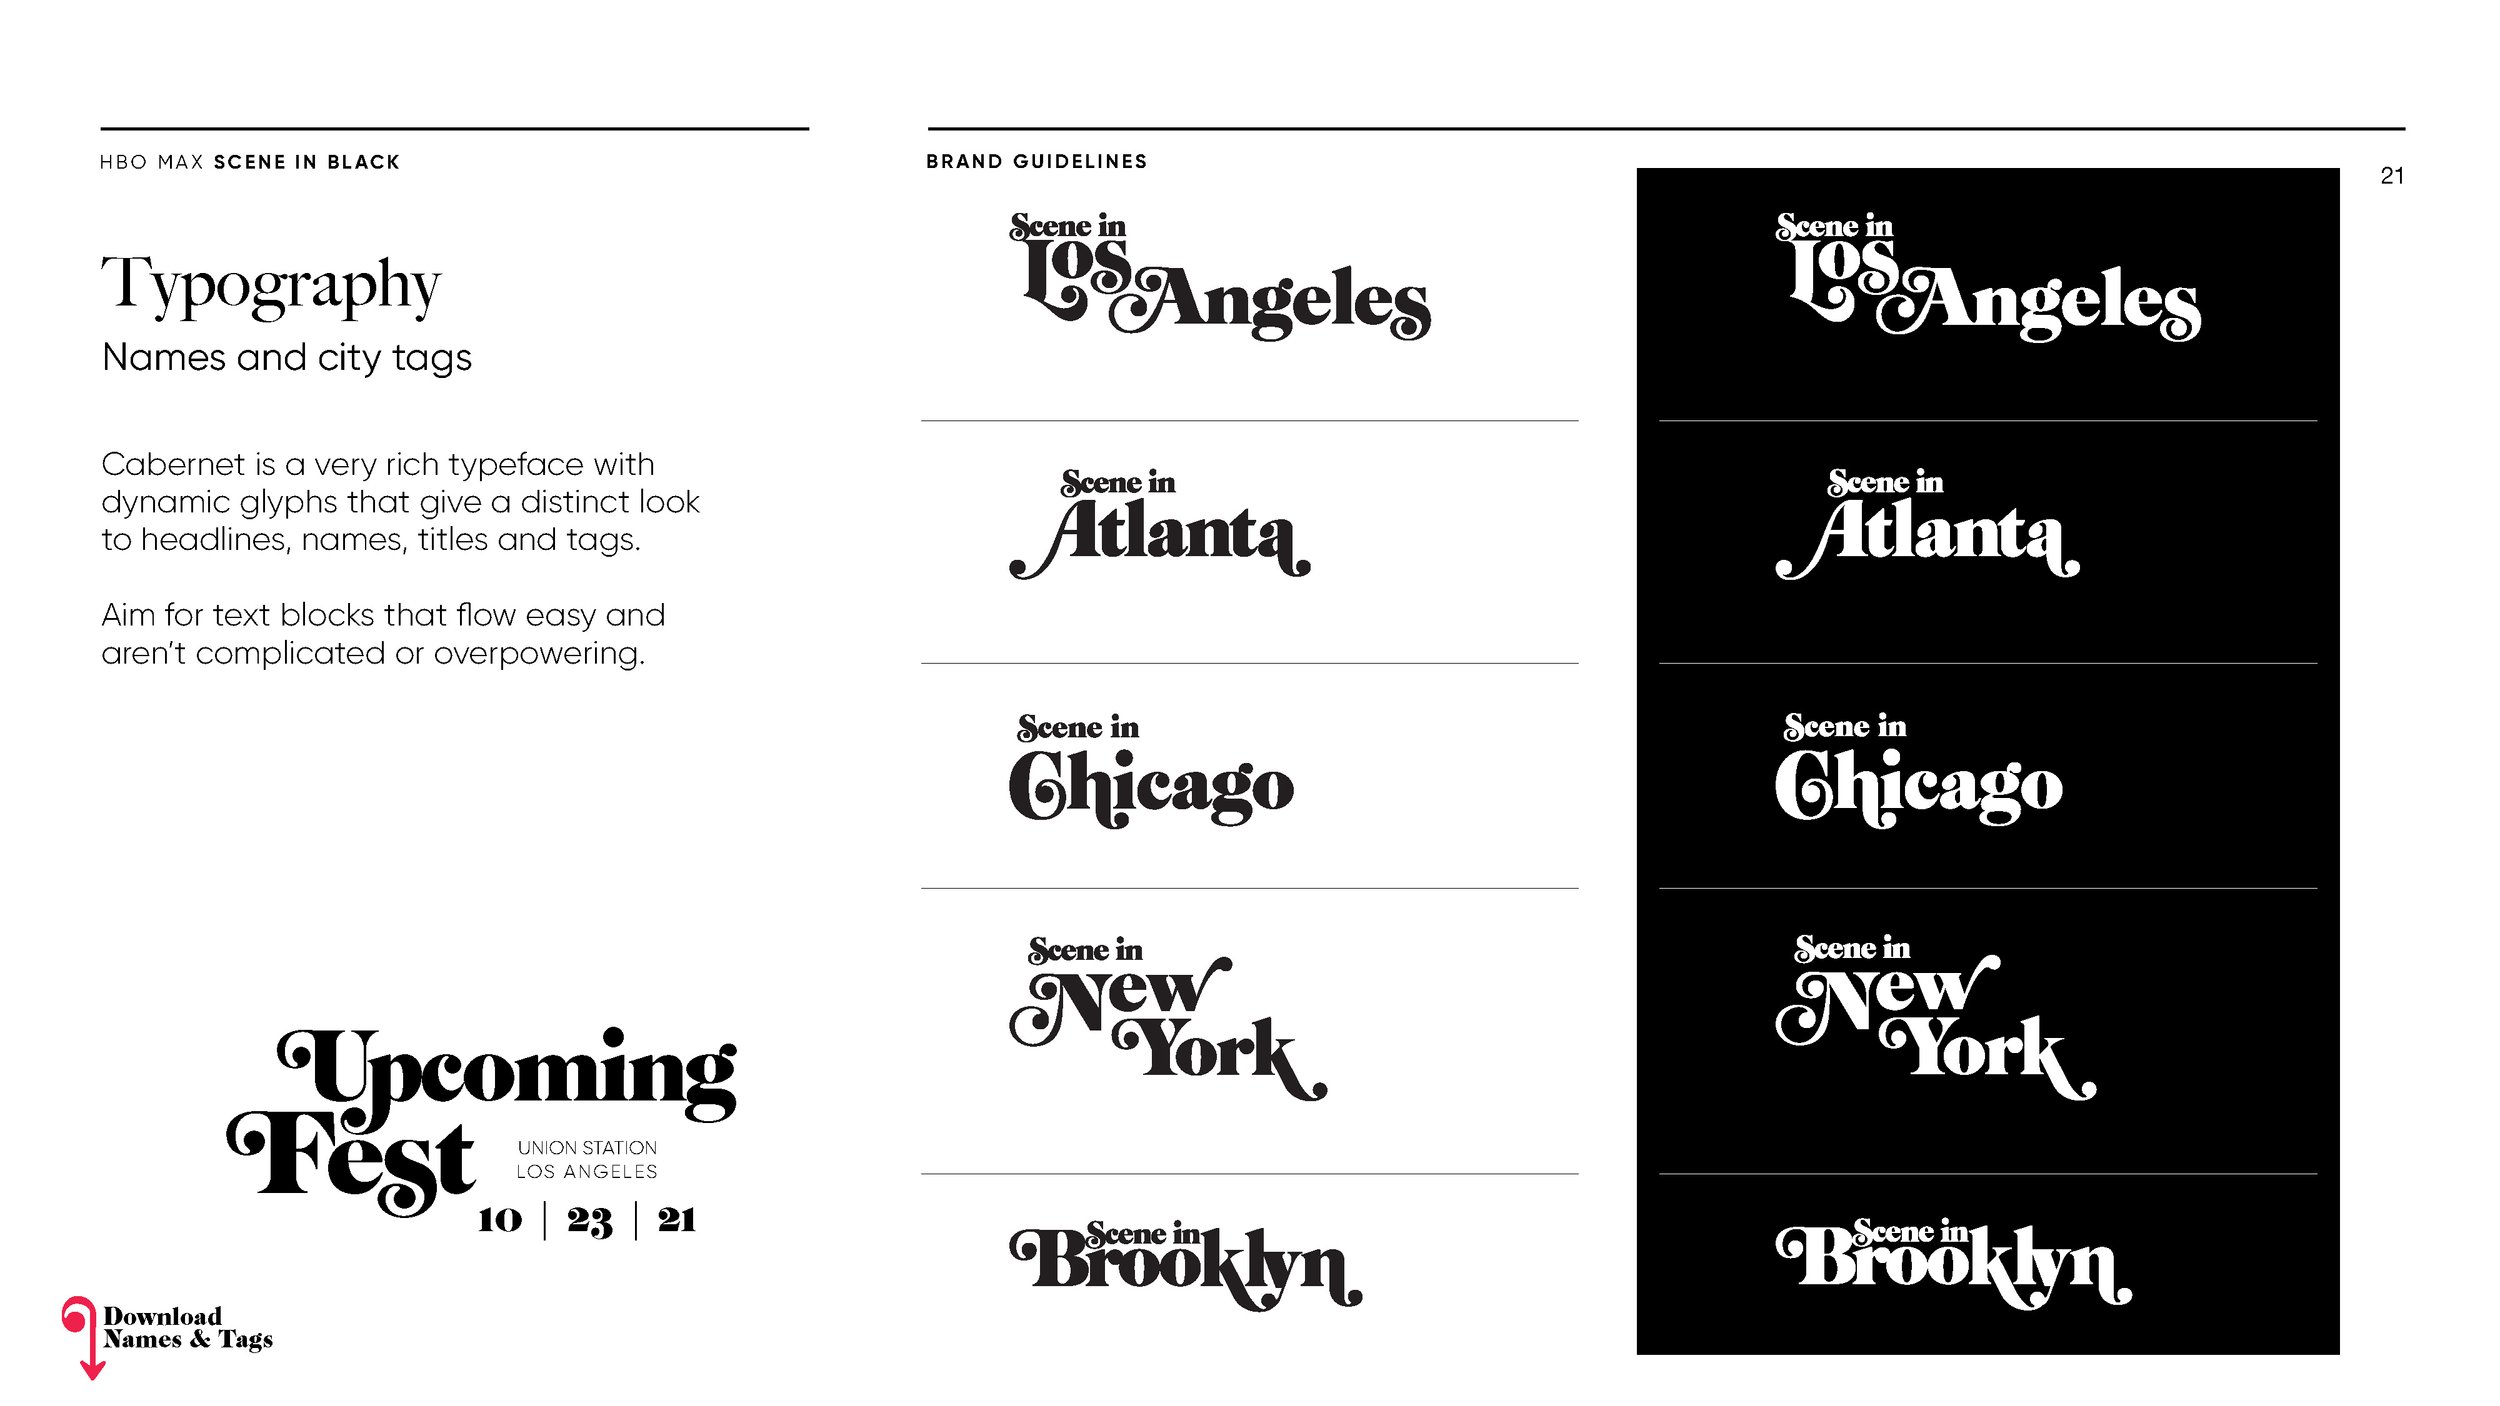 HBOMax_SceneinBlack | Brand Guidelines | Final Oct21_Page_21.jpg